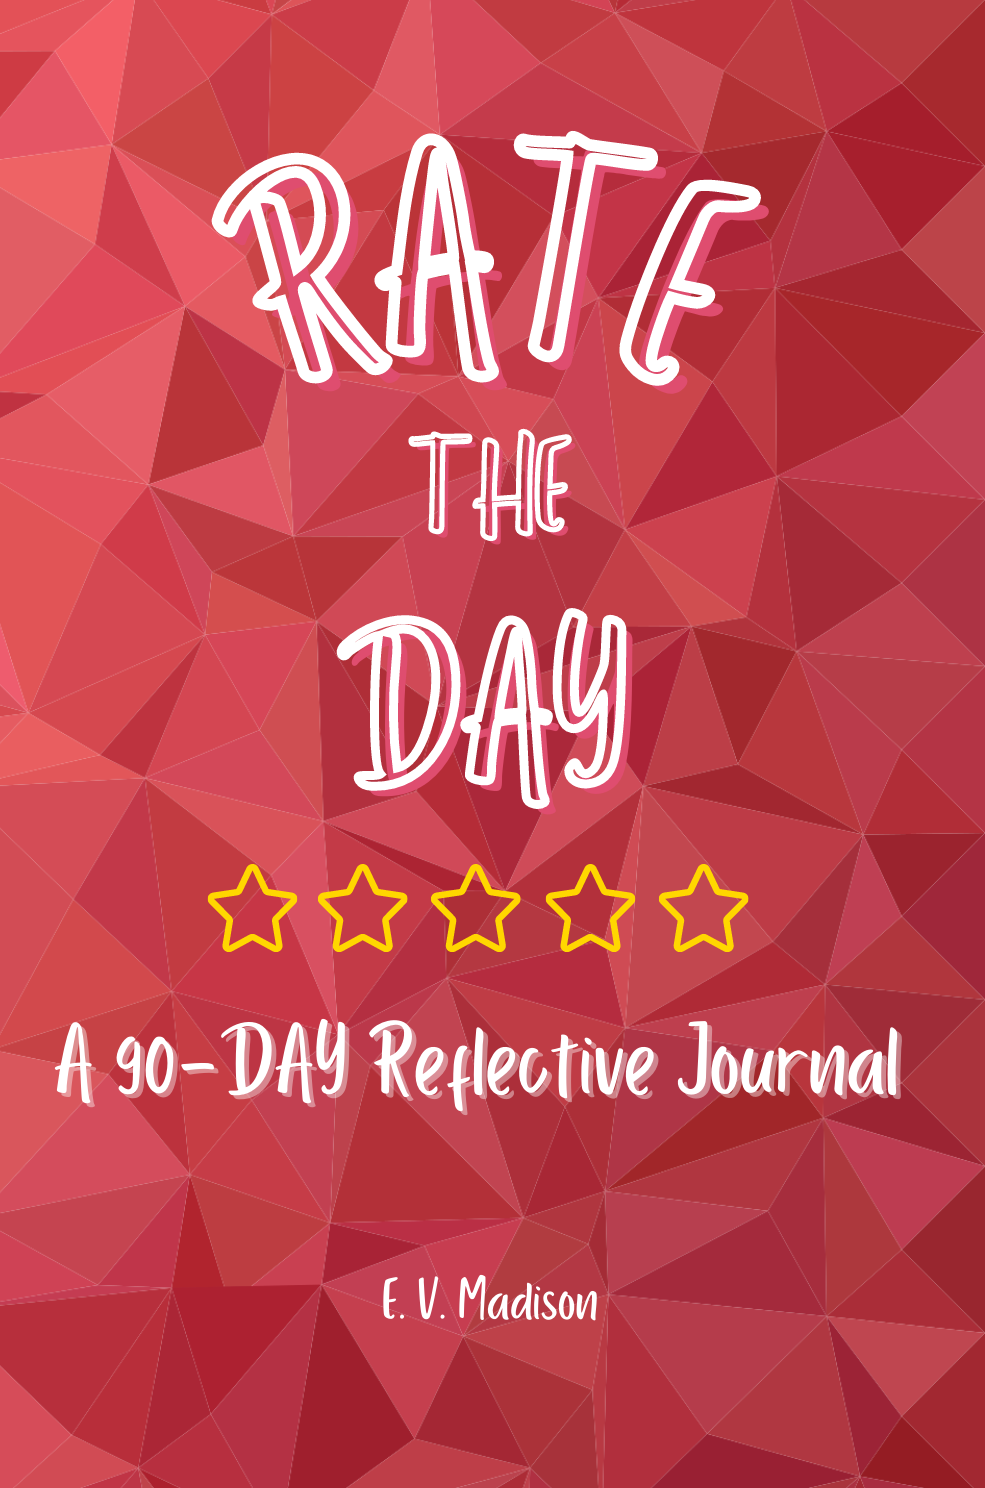 Rate the Day: A 90-Day Reflective Journal - Ruby Berry Edition